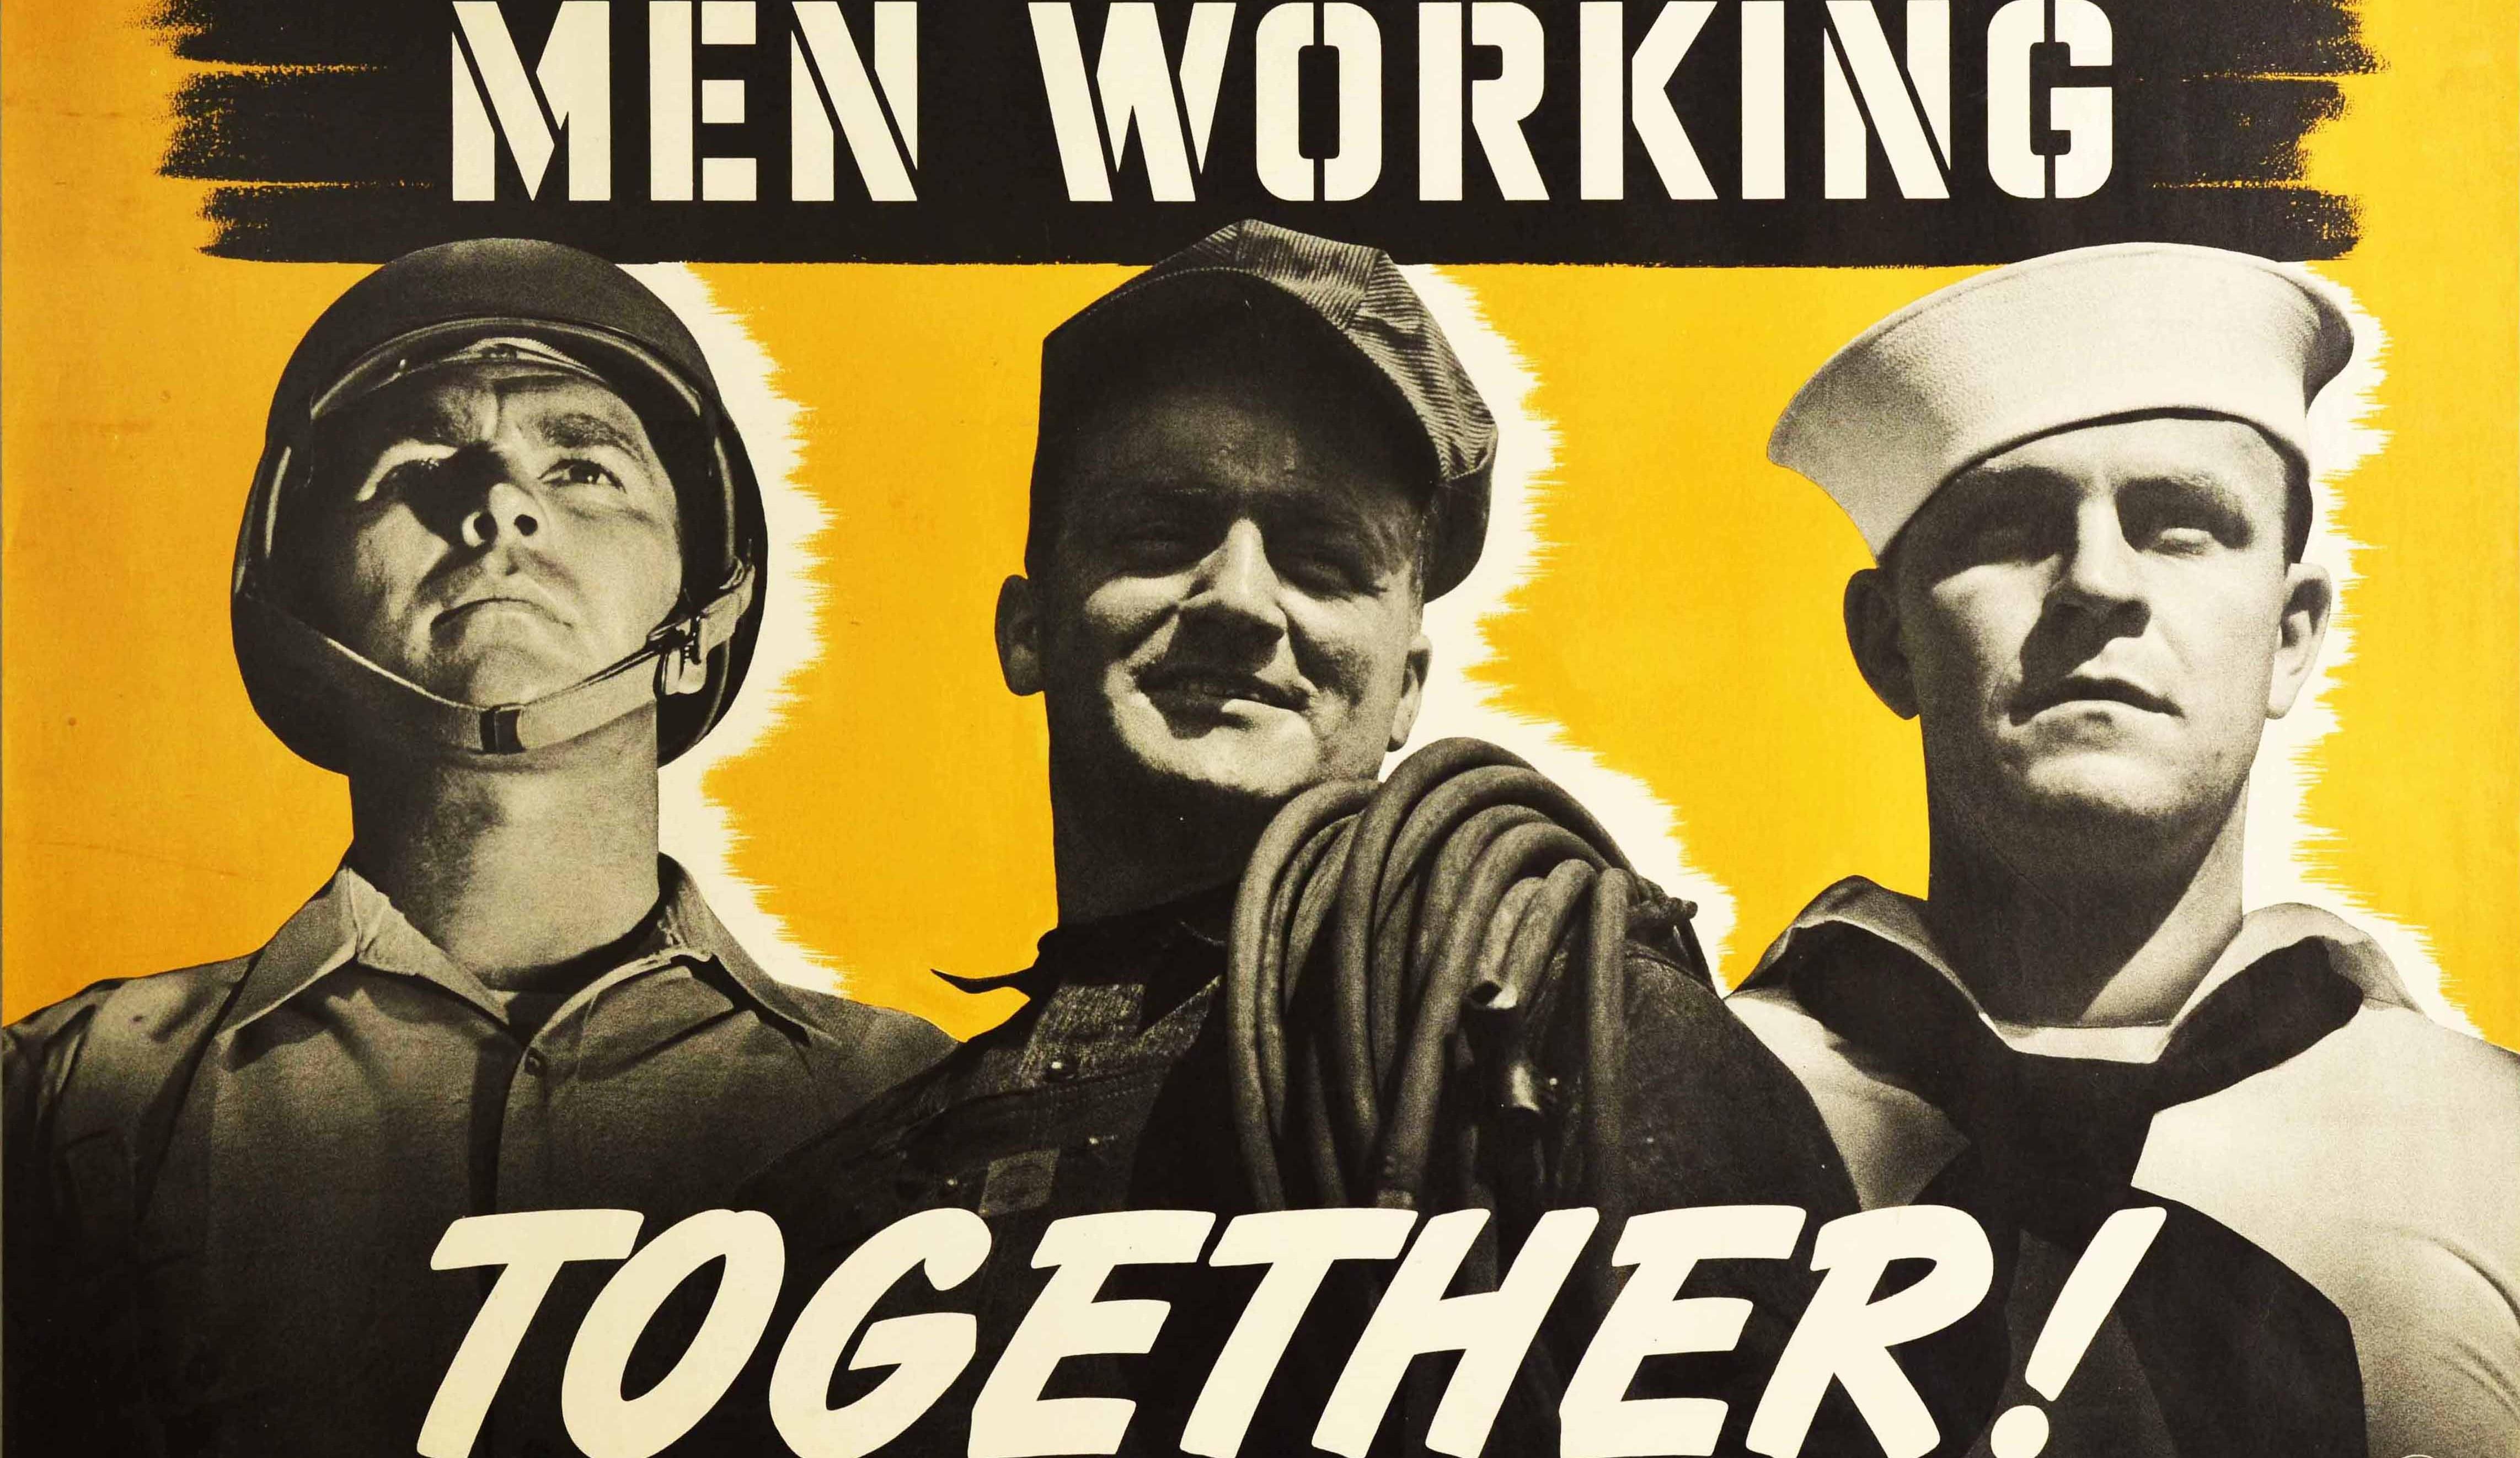 American Original Vintage Poster Men Working Together WWII US Army Navy Home Front Worker